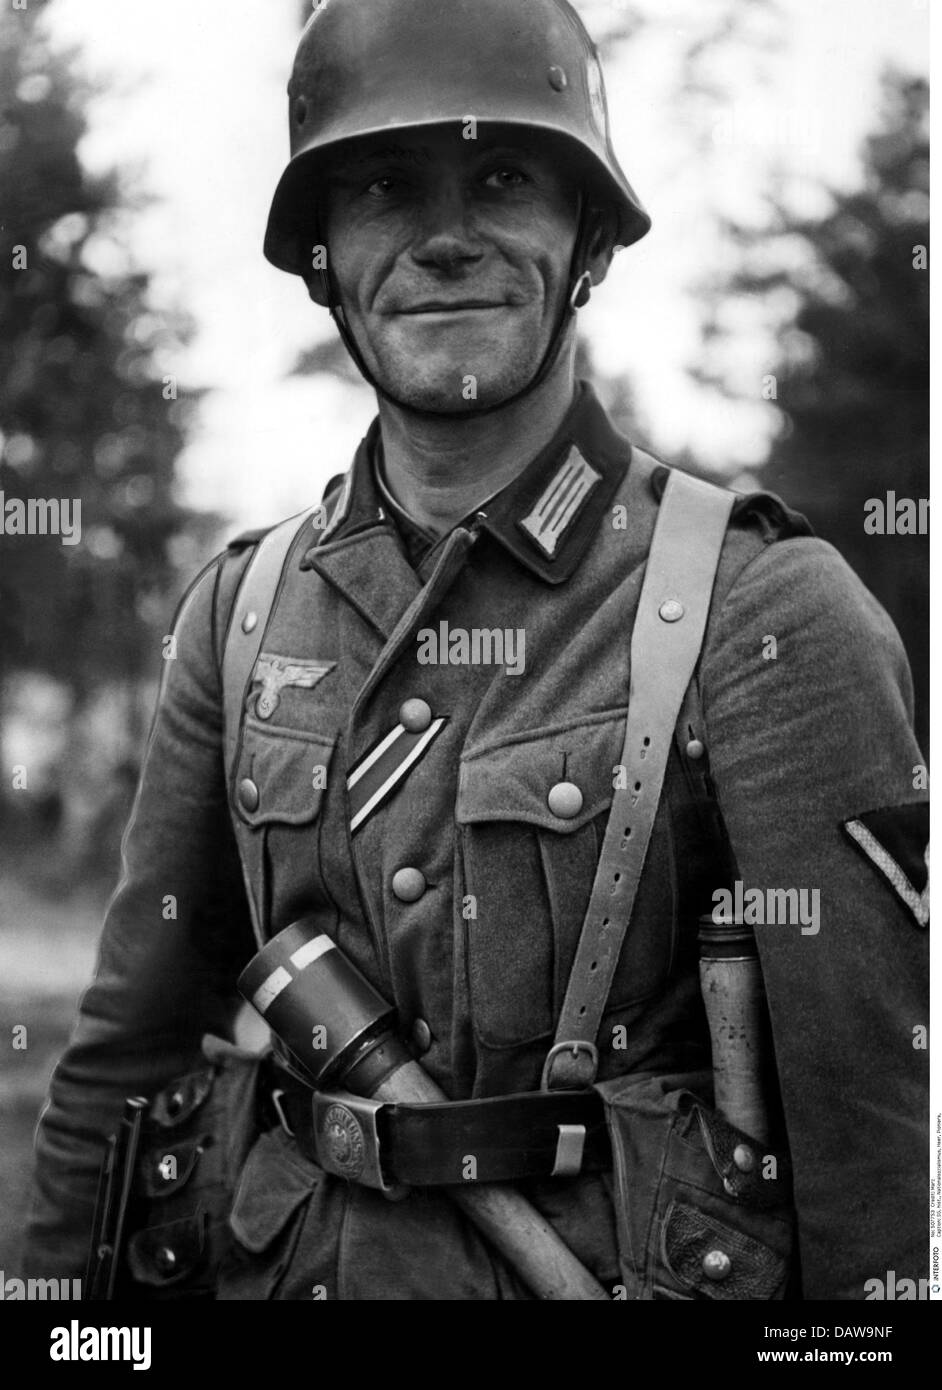 Nazism / National Socialism, military, Wehrmacht, army, German assault pioneer, Gefreiter (private) with field uniform, 15.8.1940, Additional-Rights-Clearences-Not Available Stock Photo